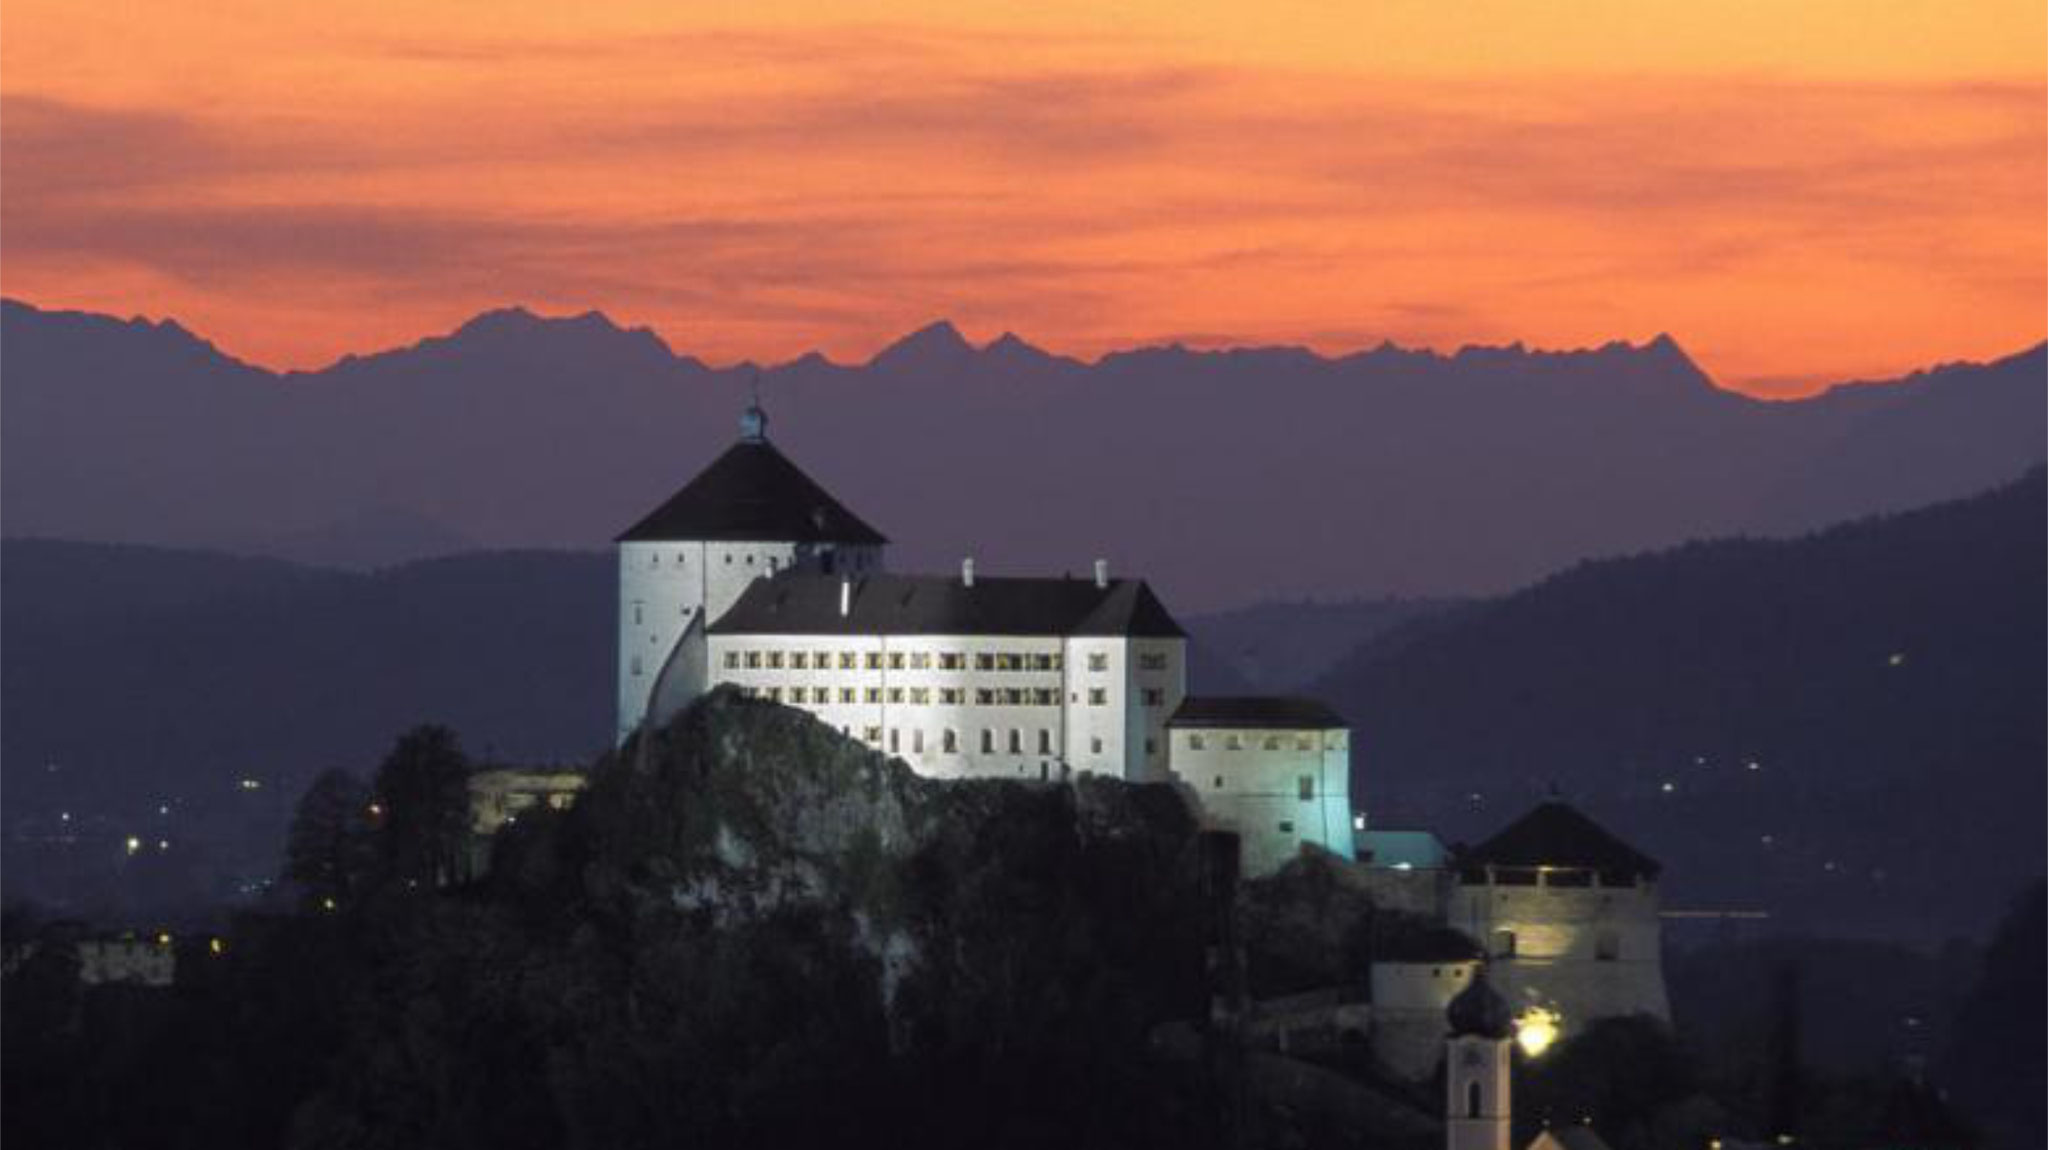 The Castle Kufstein in Austria during the evening - only 5 minutes away from the Event-Hotel